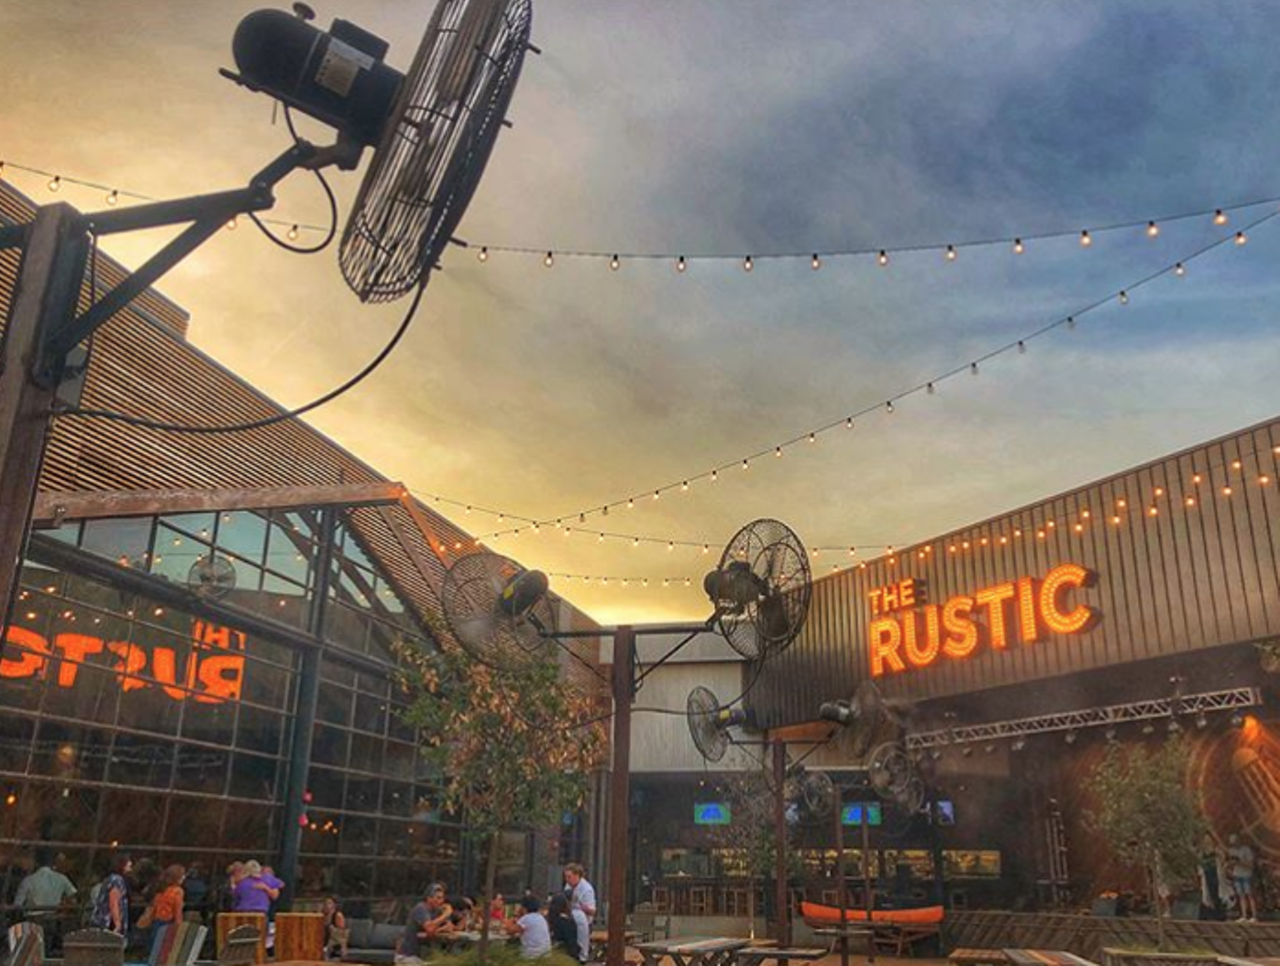 The Rustic
17619 La Cantera Pkwy Ste 204, (210) 245-7500, therustic.com
If you’ve yet to visit The Rustic, what are you waiting for? This venue offers live music both indoor and outdoor, and brings in acts from a variety of genres. Plus, you can get there early to enjoy farm-to-table American bites. Just be sure to wash it down from the beer selections.
Photo via Instagram / nikixixixi